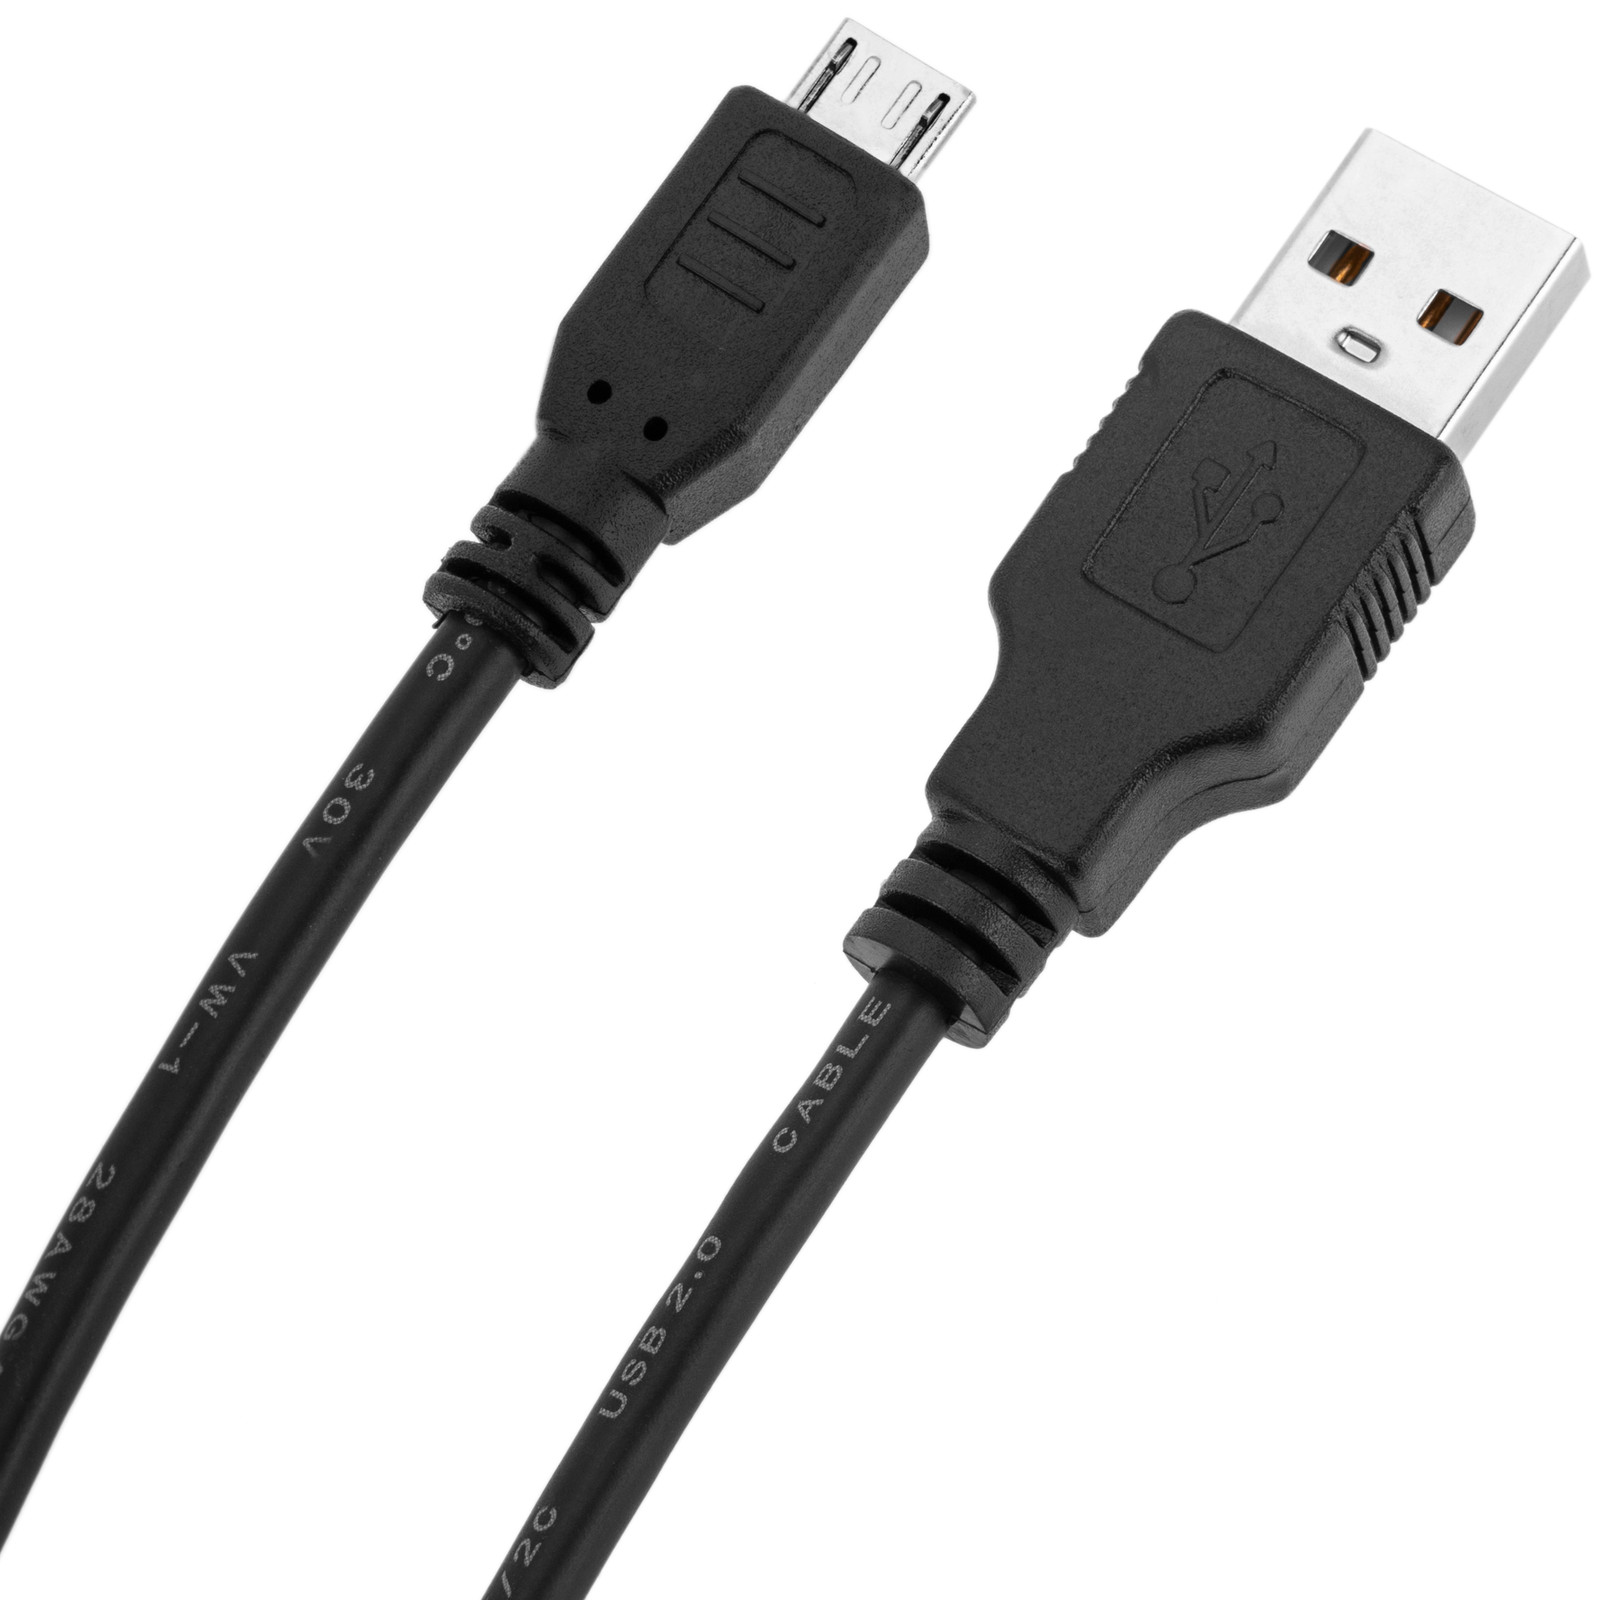 E-Quip Equip USB 2.0 Connection Cable A-Plug/Micro-B 1m